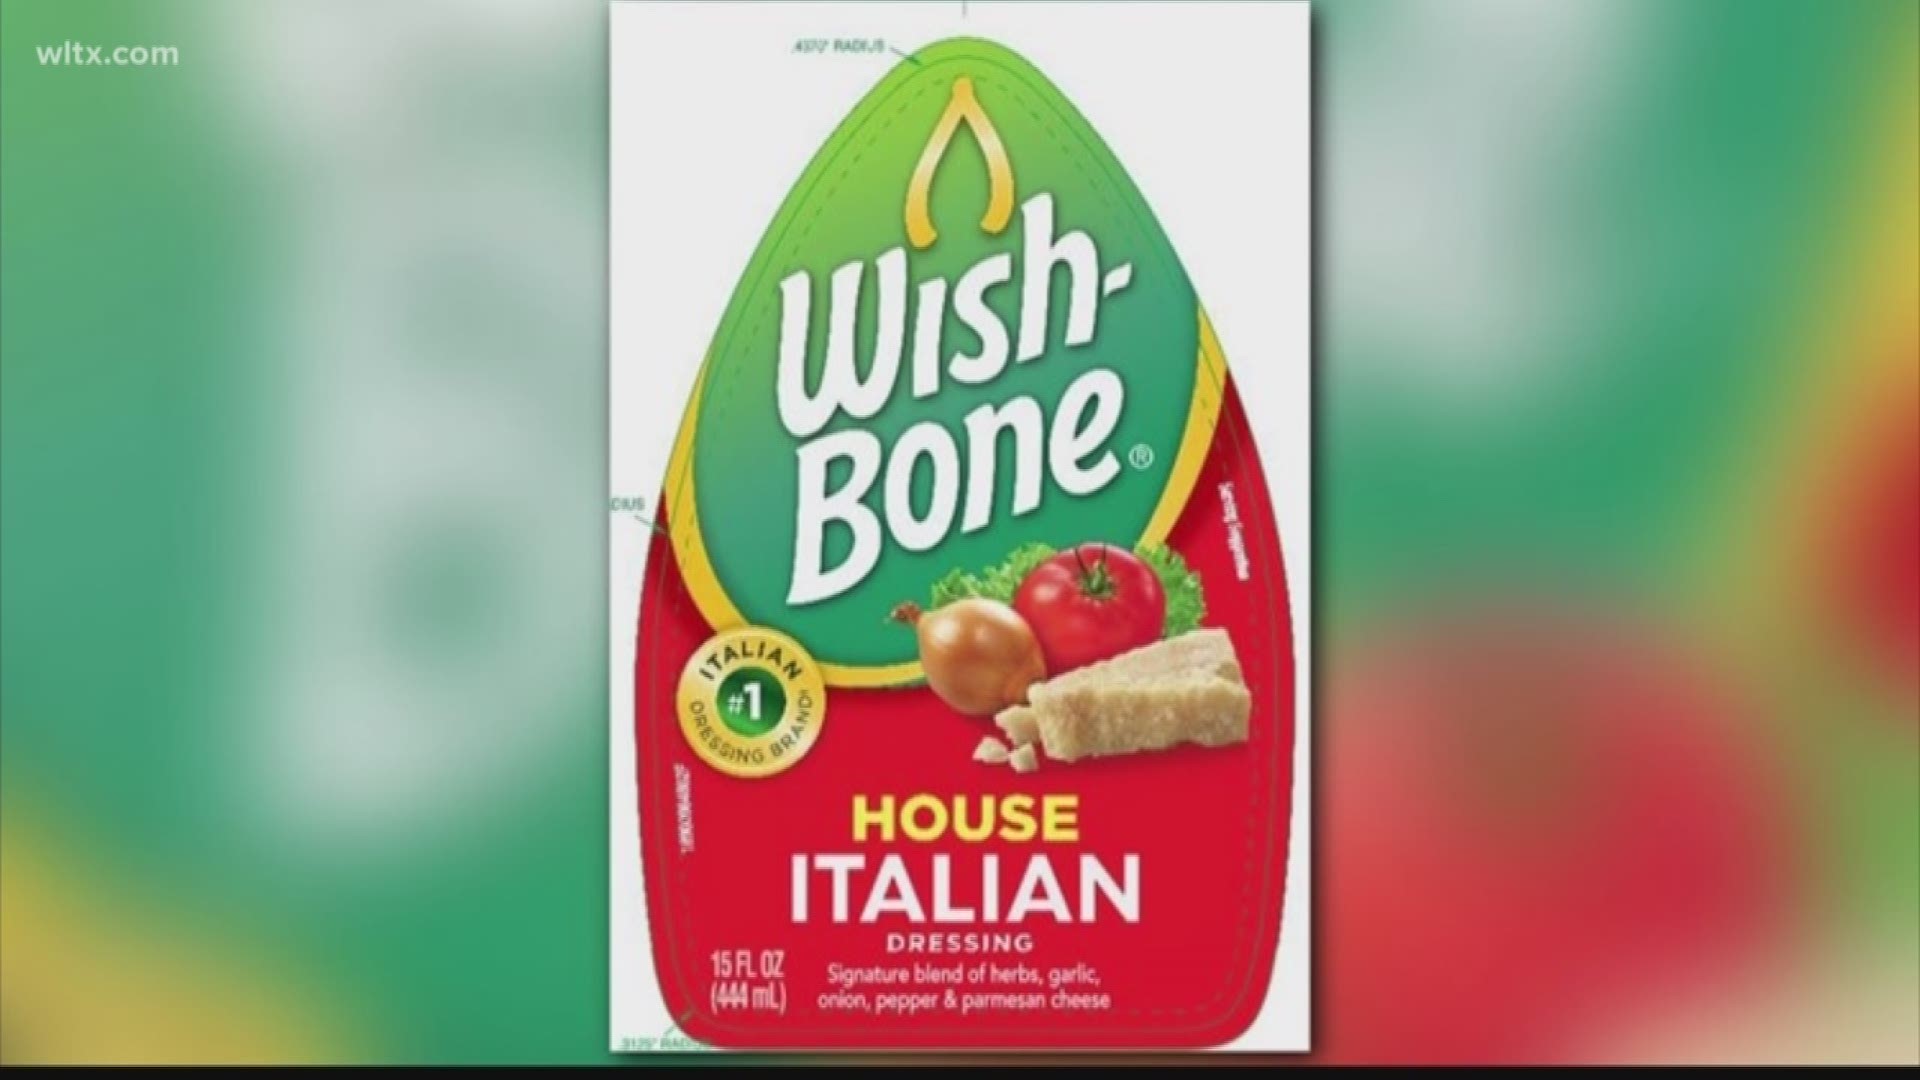 Nearly 8,000 cases of Wish-Bone's House Italian Dressing has been recalled.